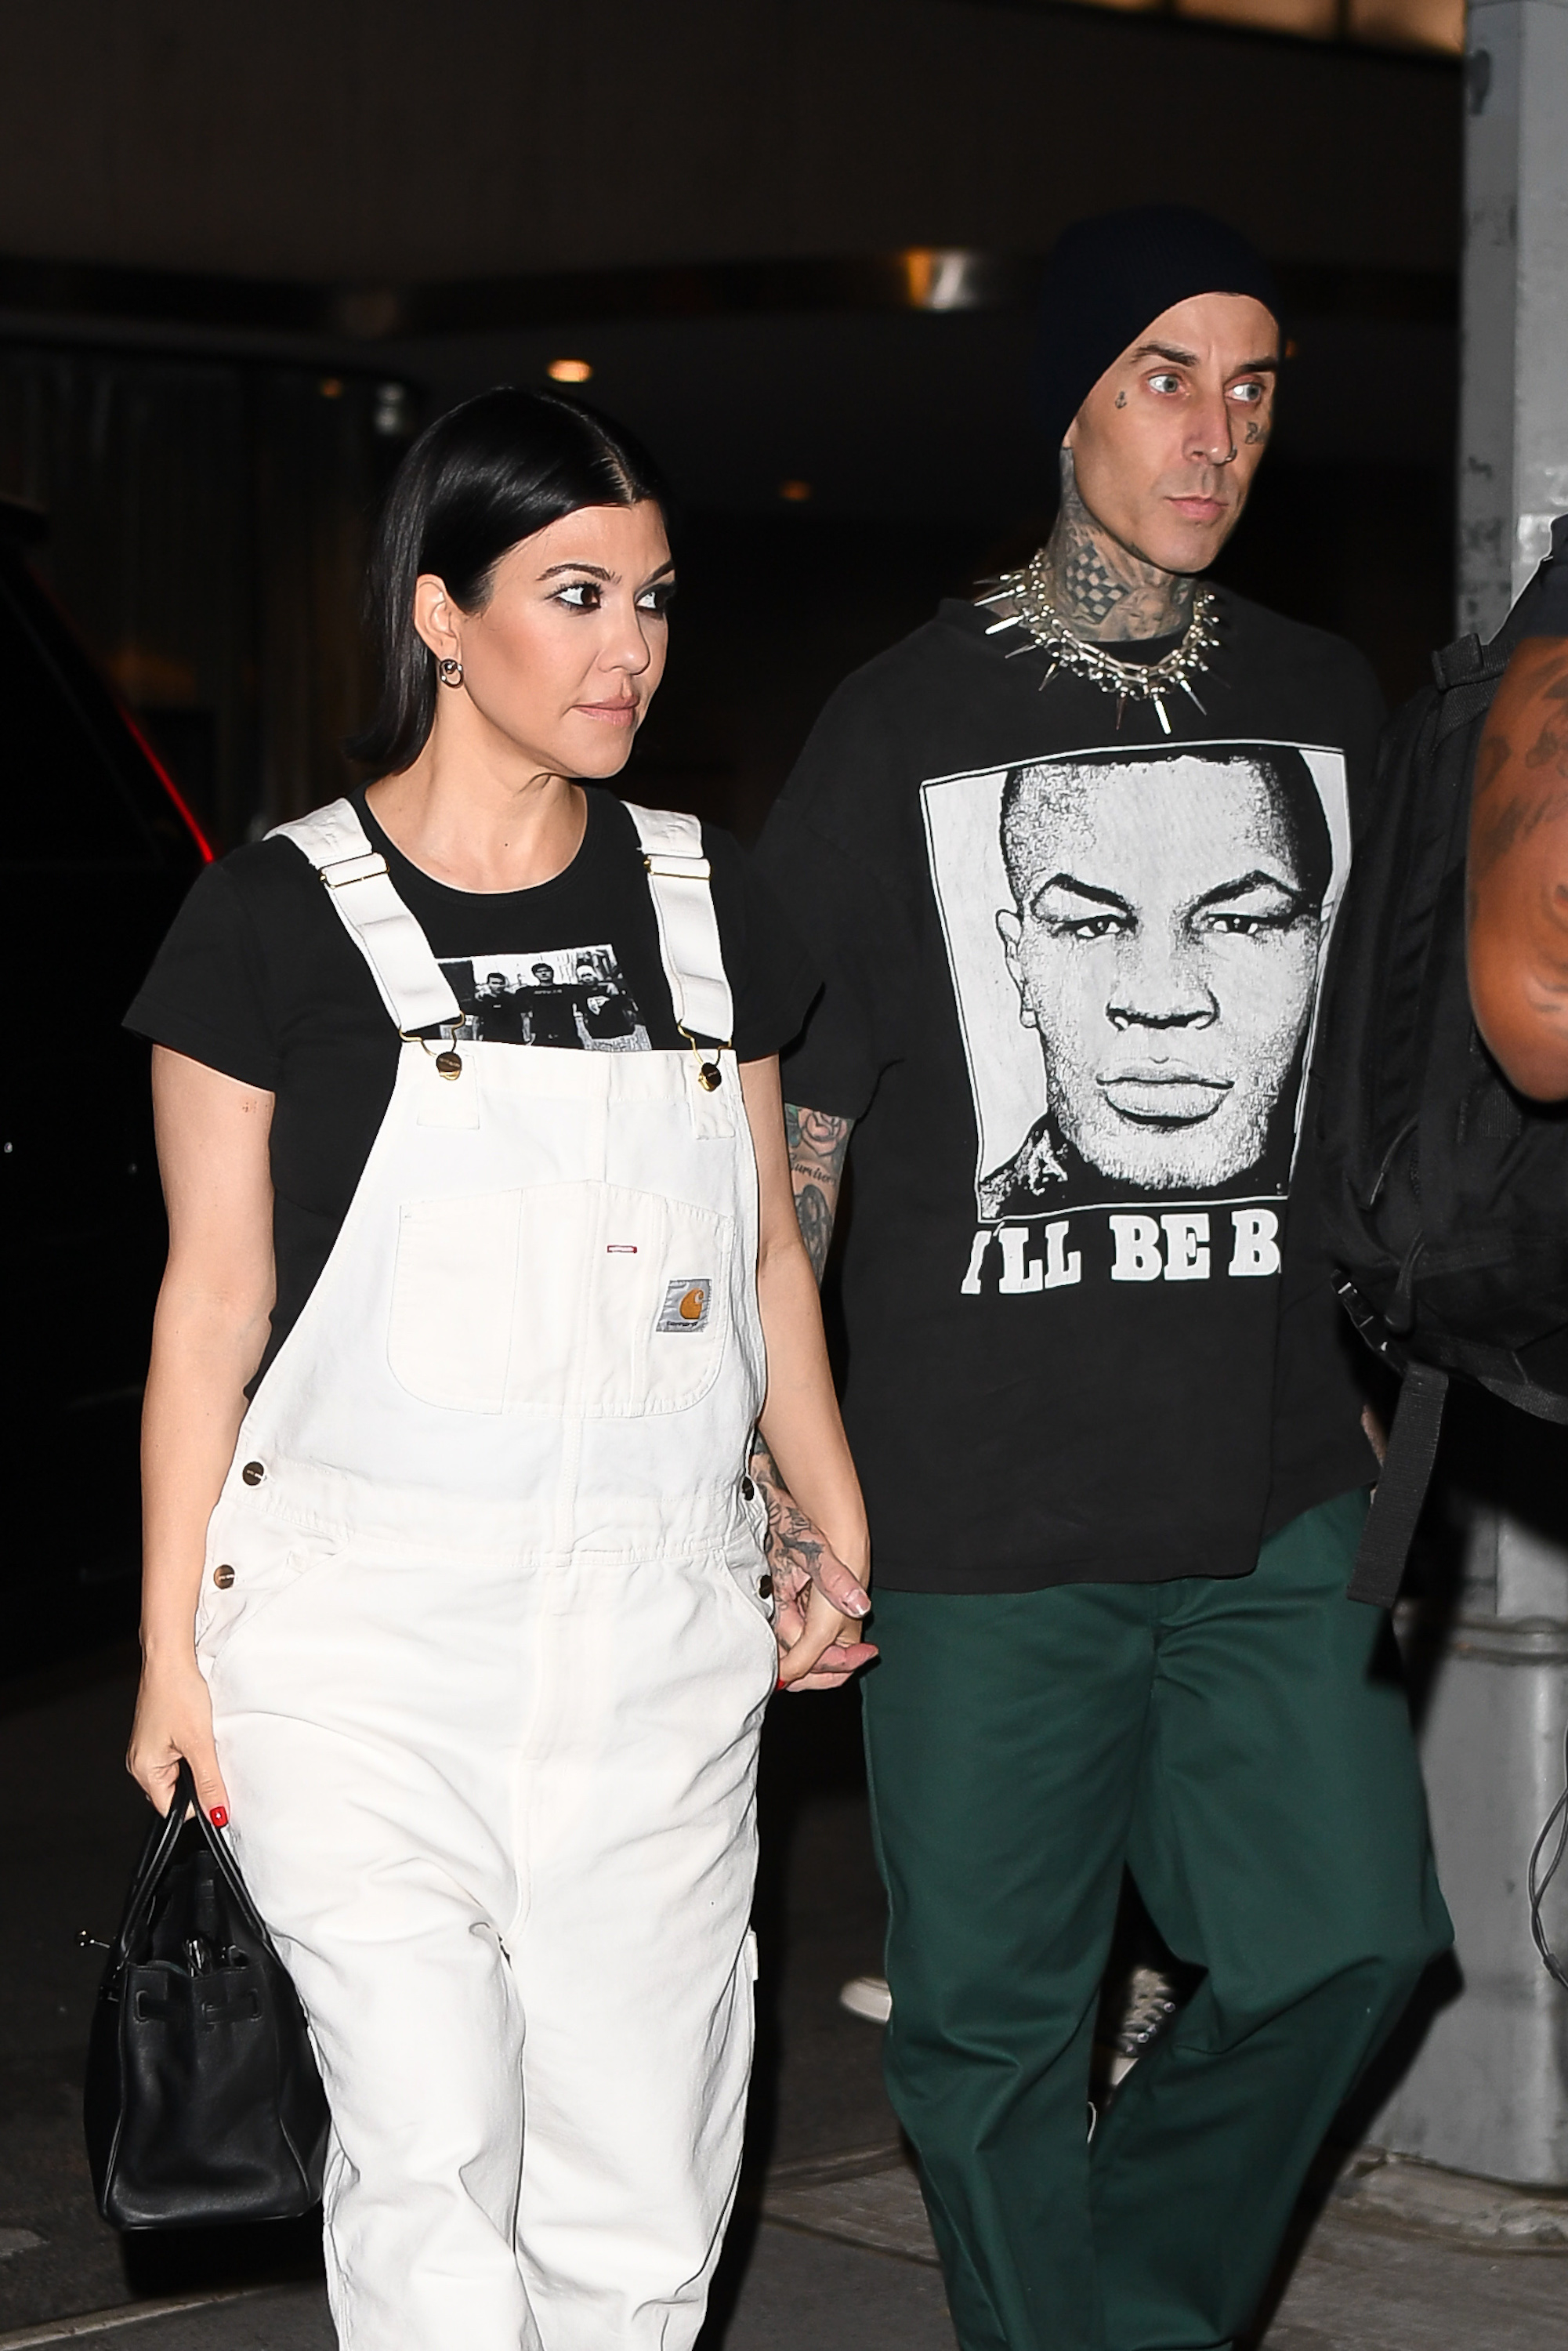 travis and kourtney holding hands as they walk somewhere at night